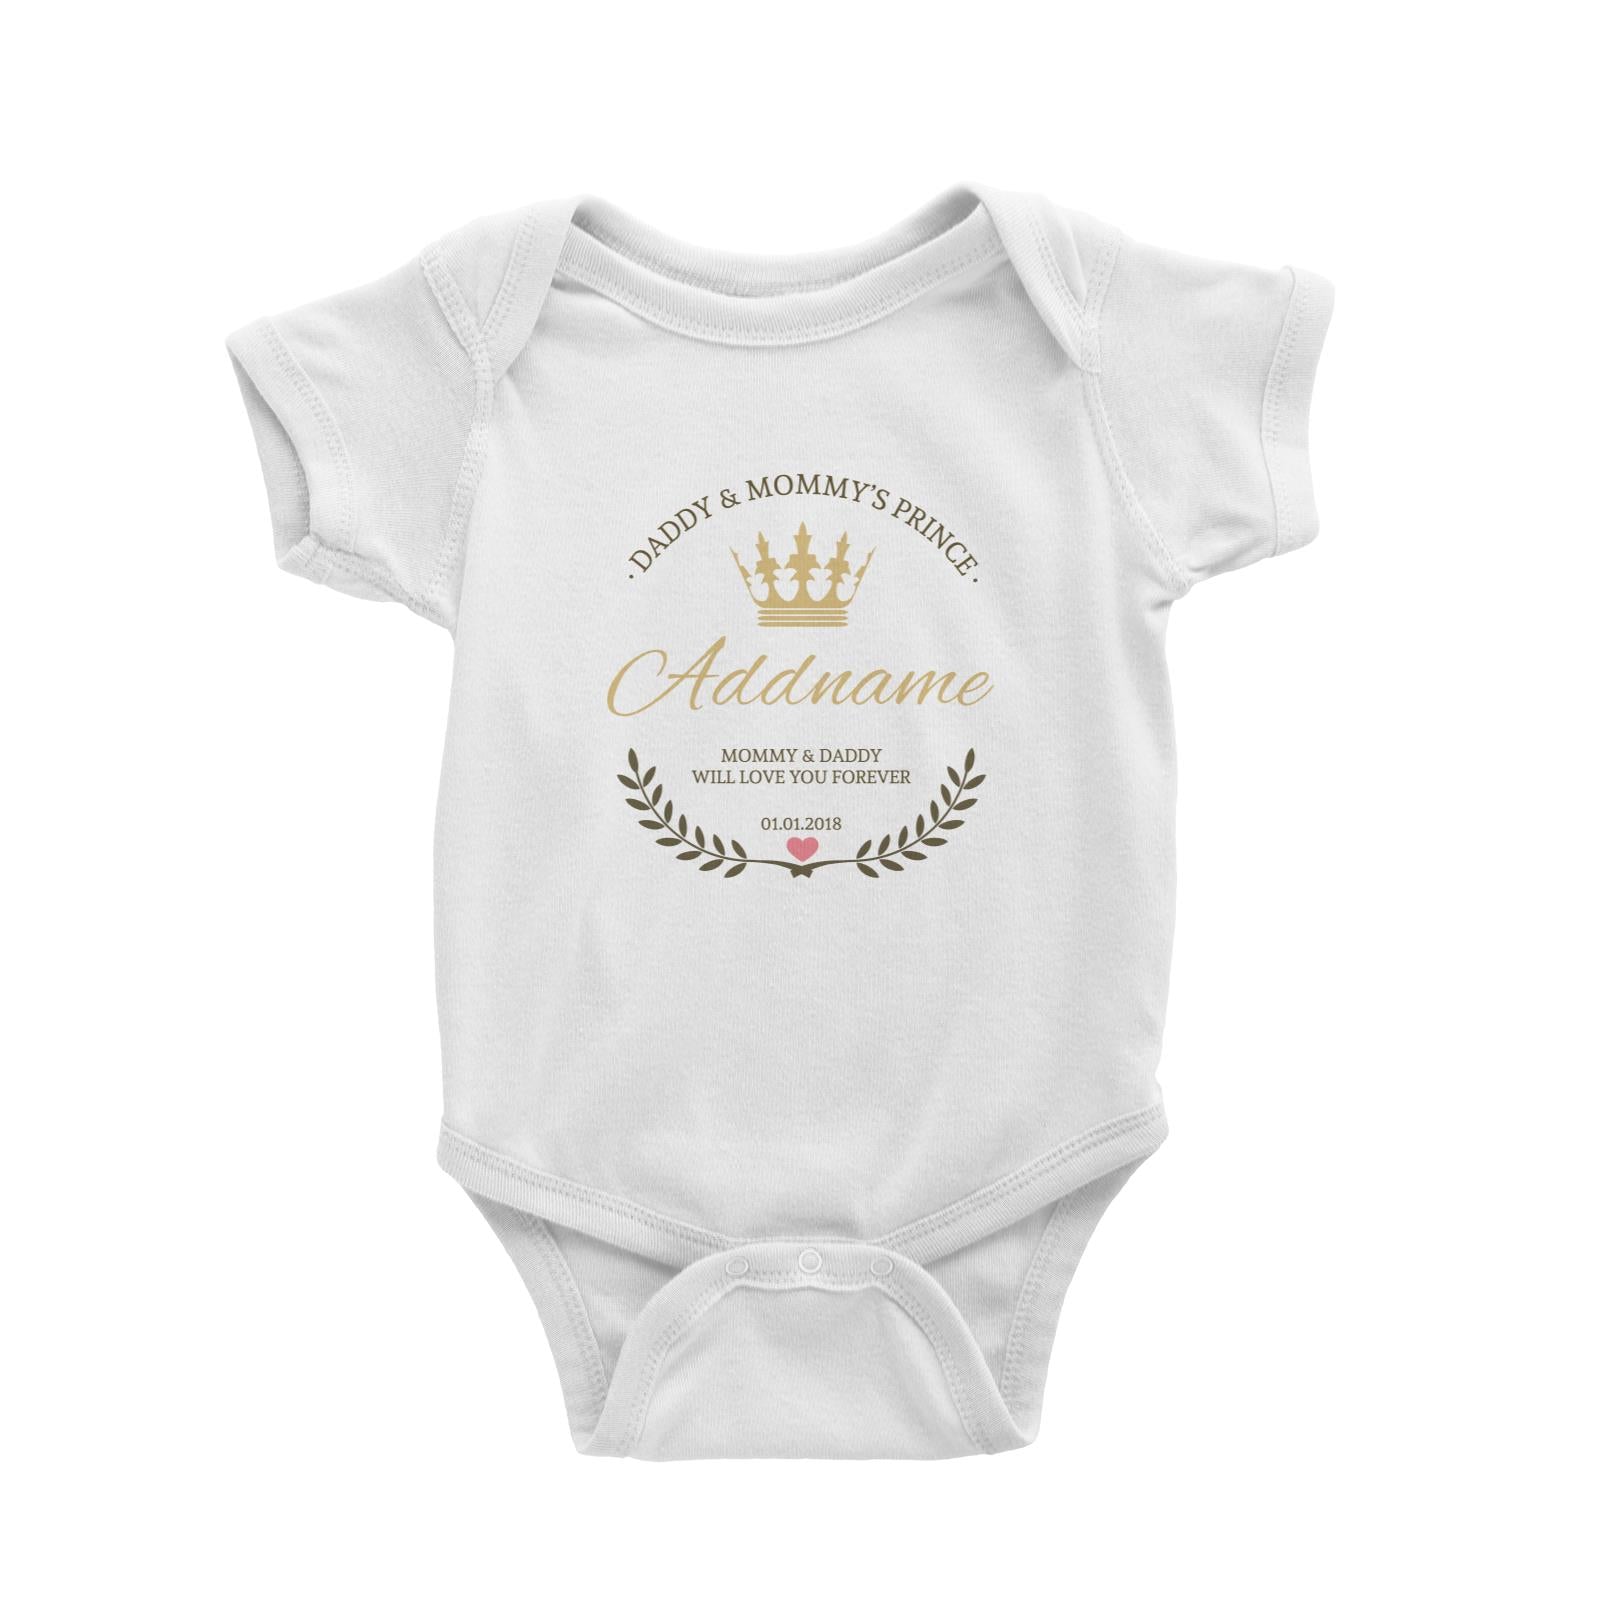 Daddy and Mommy's Prince with Crown Wreath Personalizable with Name Text and Date Baby Romper